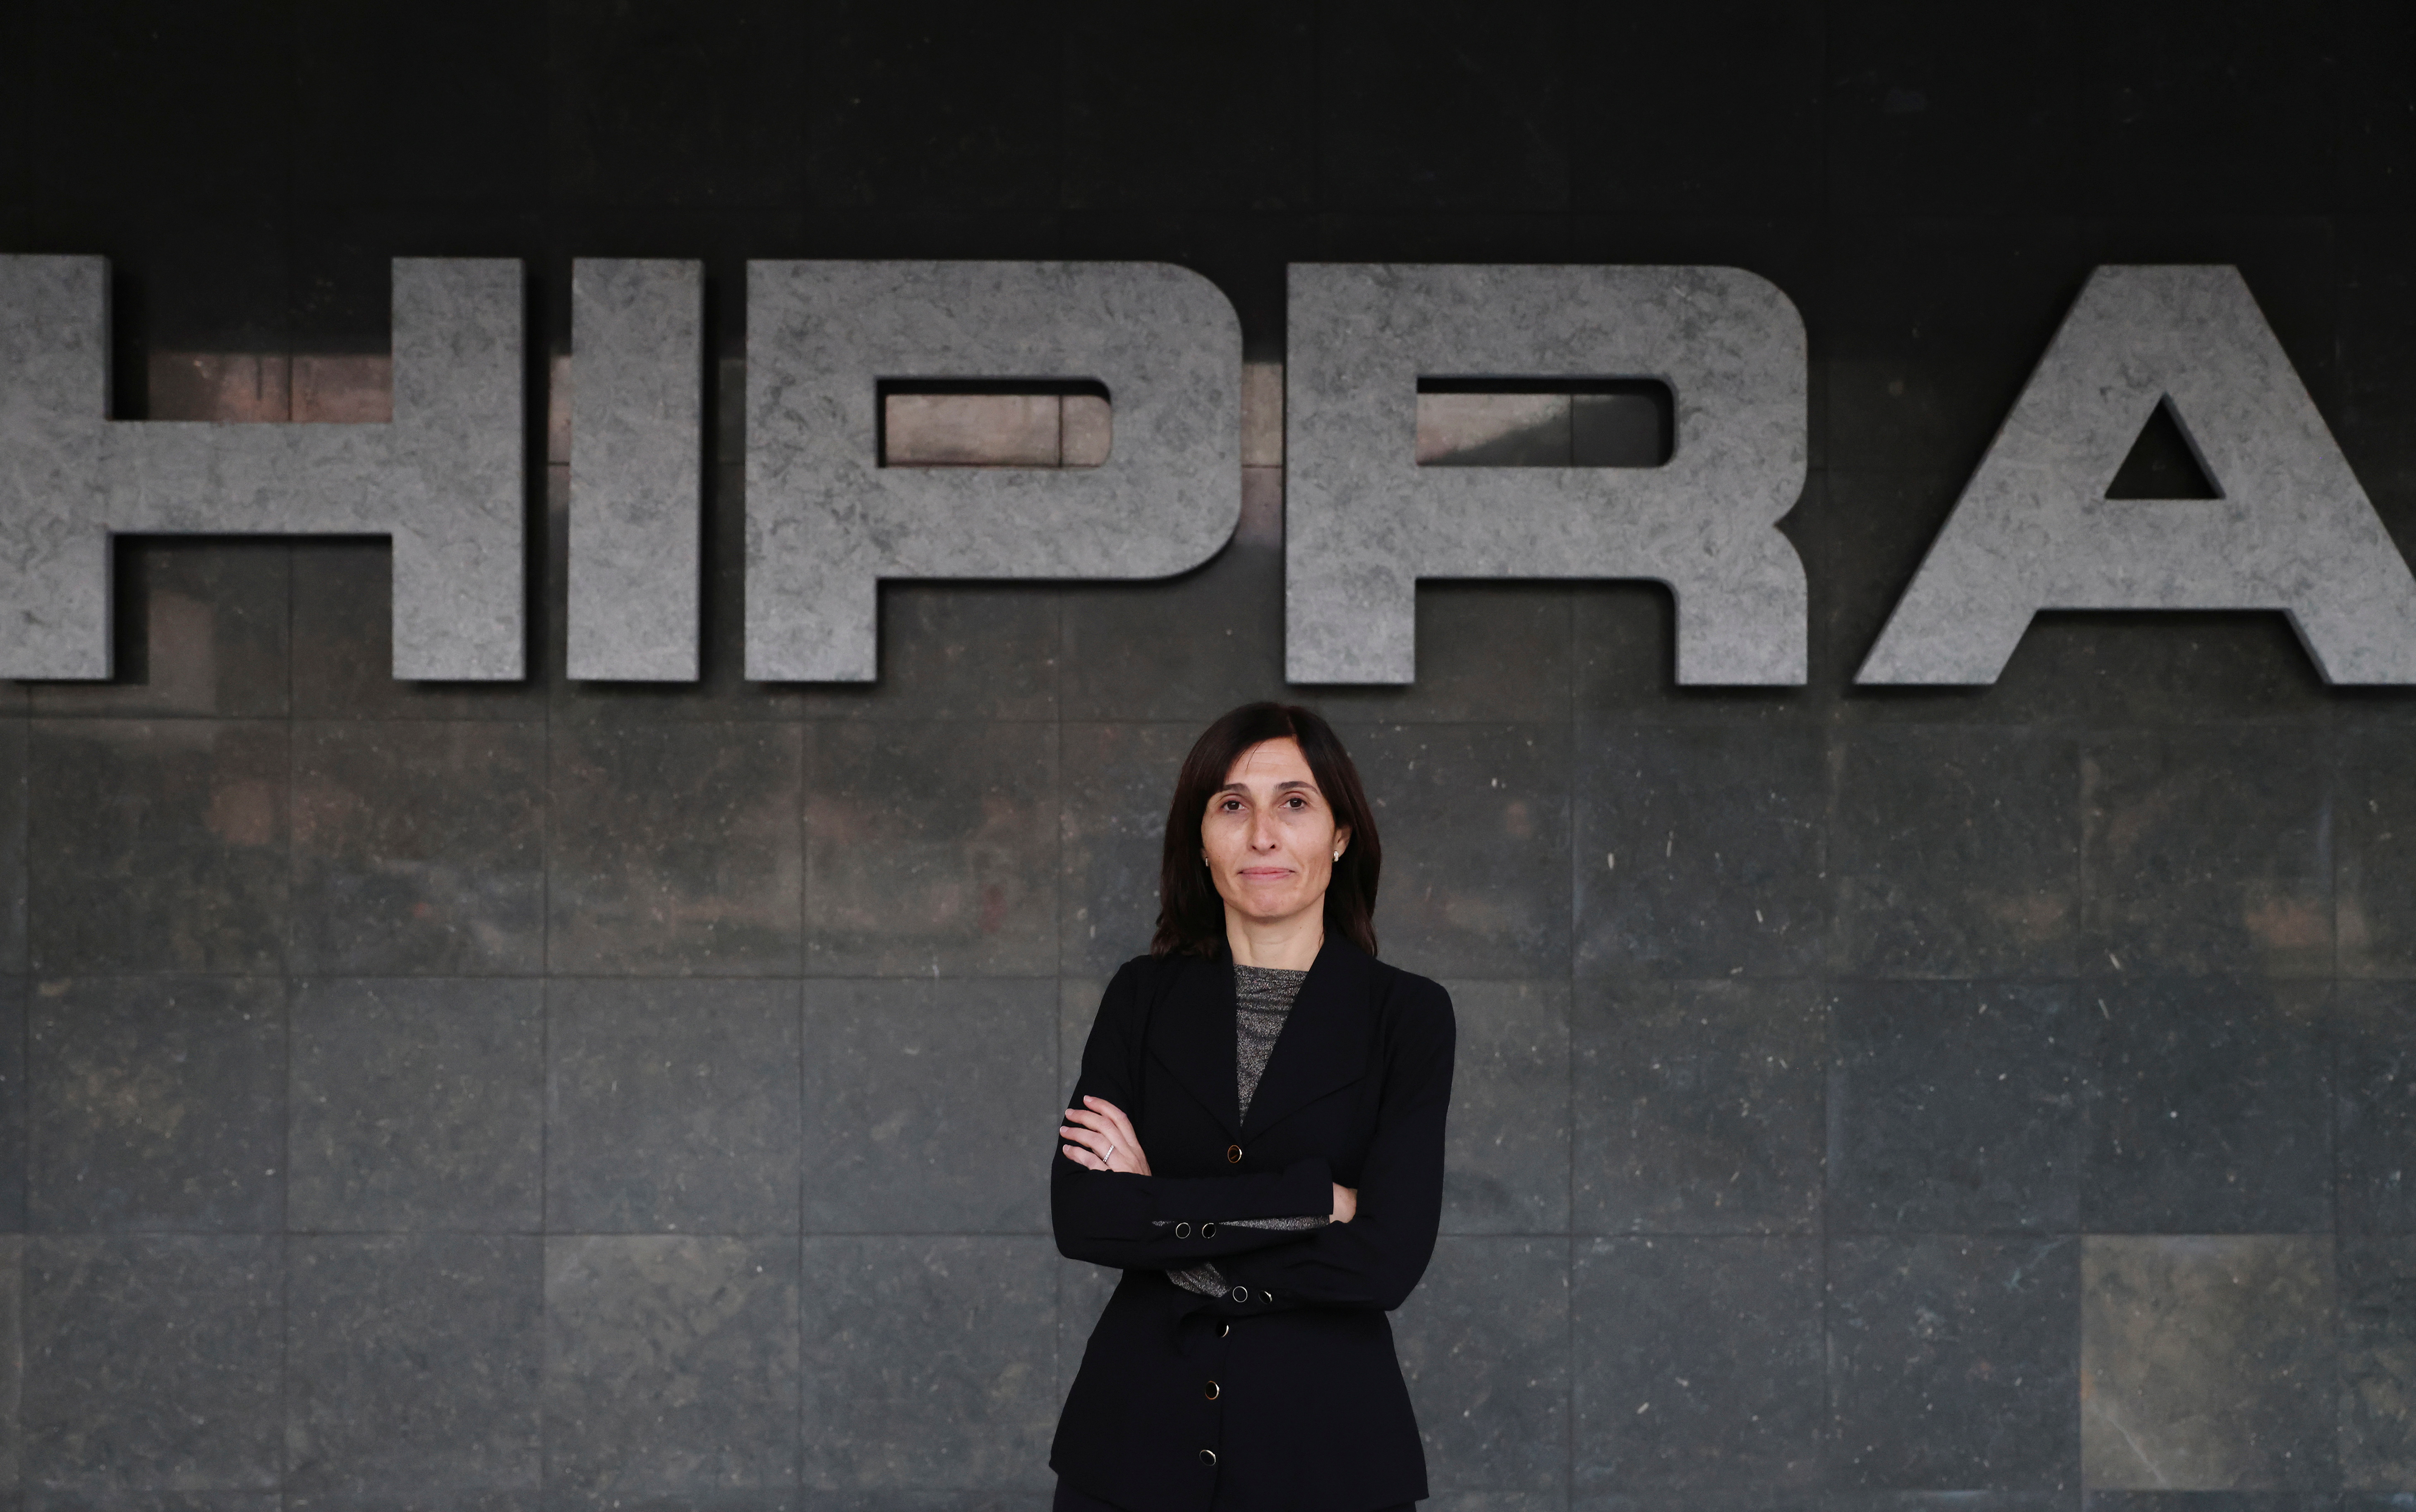 Elia Torroella, Vice-President and R&D chief of Spanish pharmaceutical company Hipra, poses after an interview at its headquarters in Amer, near Girona, Spain, December 2, 2021. Picture taken December 2, 2021. REUTERS/Nacho Doce